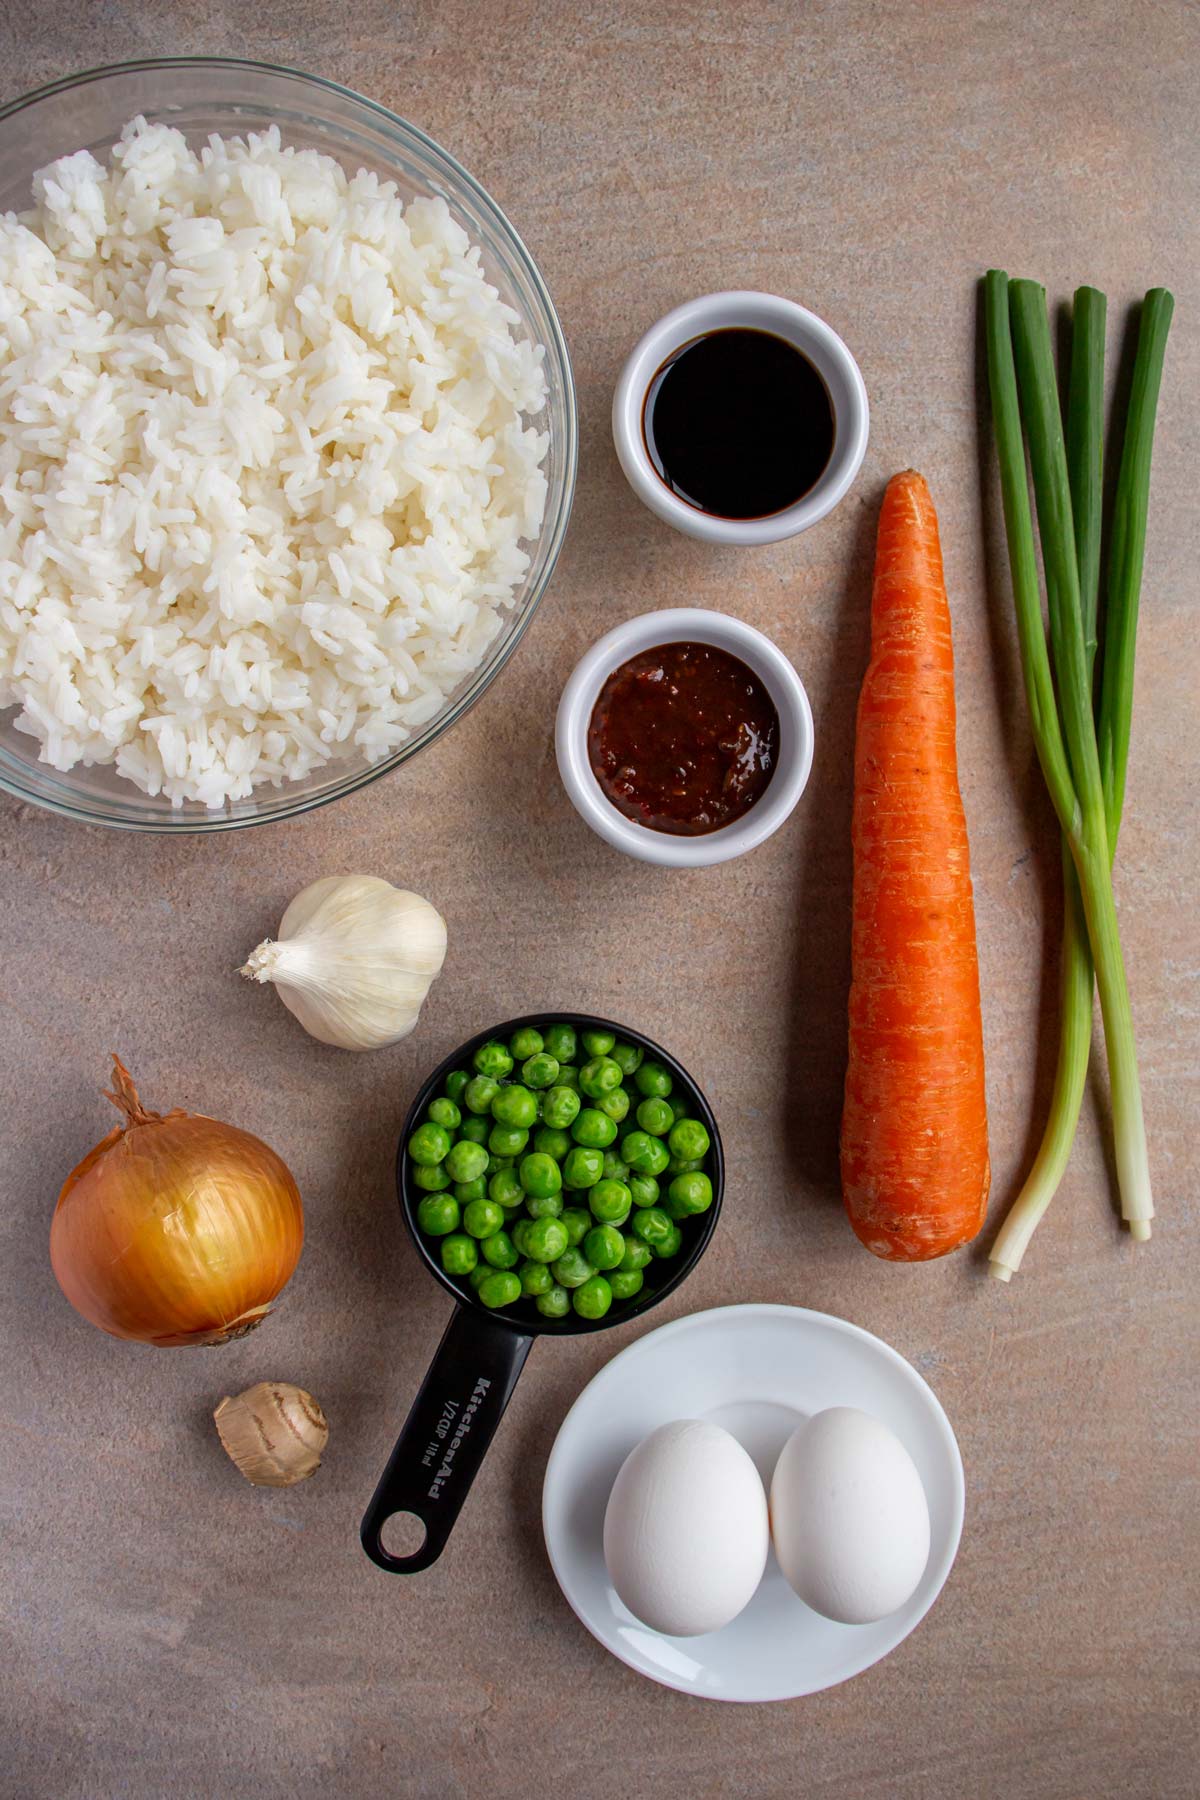 Ingredients for spicy vegetable fried rice on a tan background.